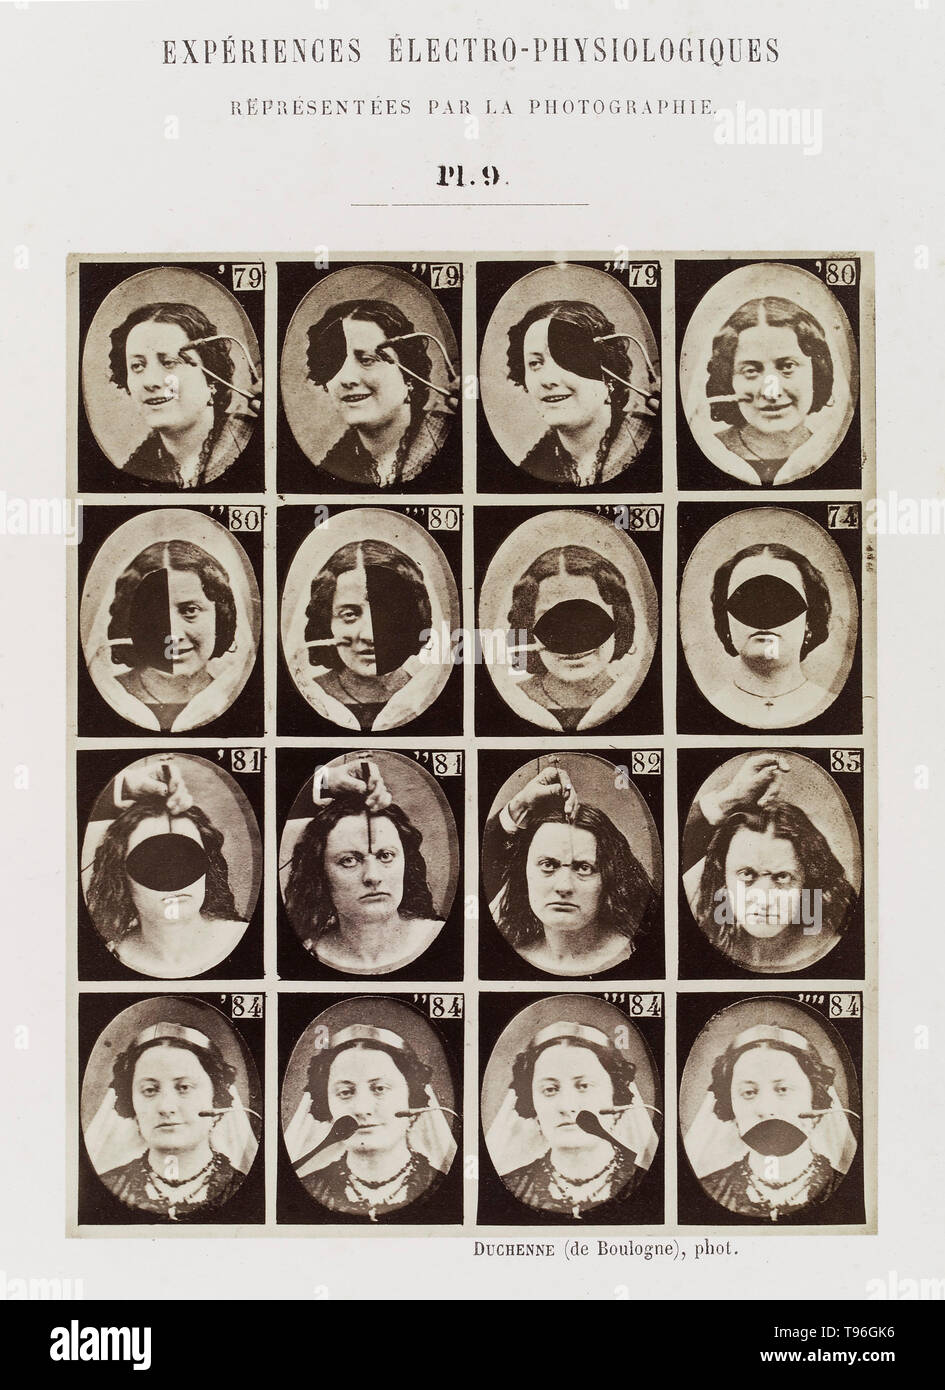 Plate 9: 16 images showing different facial expressions which are being induced by electrical currents. Guillaume-Benjamin-Amand Duchenne de Boulogne (September 17, 1806 - September 15, 1875) was a French neurologist who advanced the science of electrophysiology. Influenced by the beliefs of physiognomy, Duchenne wanted to determine how the muscles in the human face produce facial expressions which he believed to be directly linked to the soul of man. Stock Photo